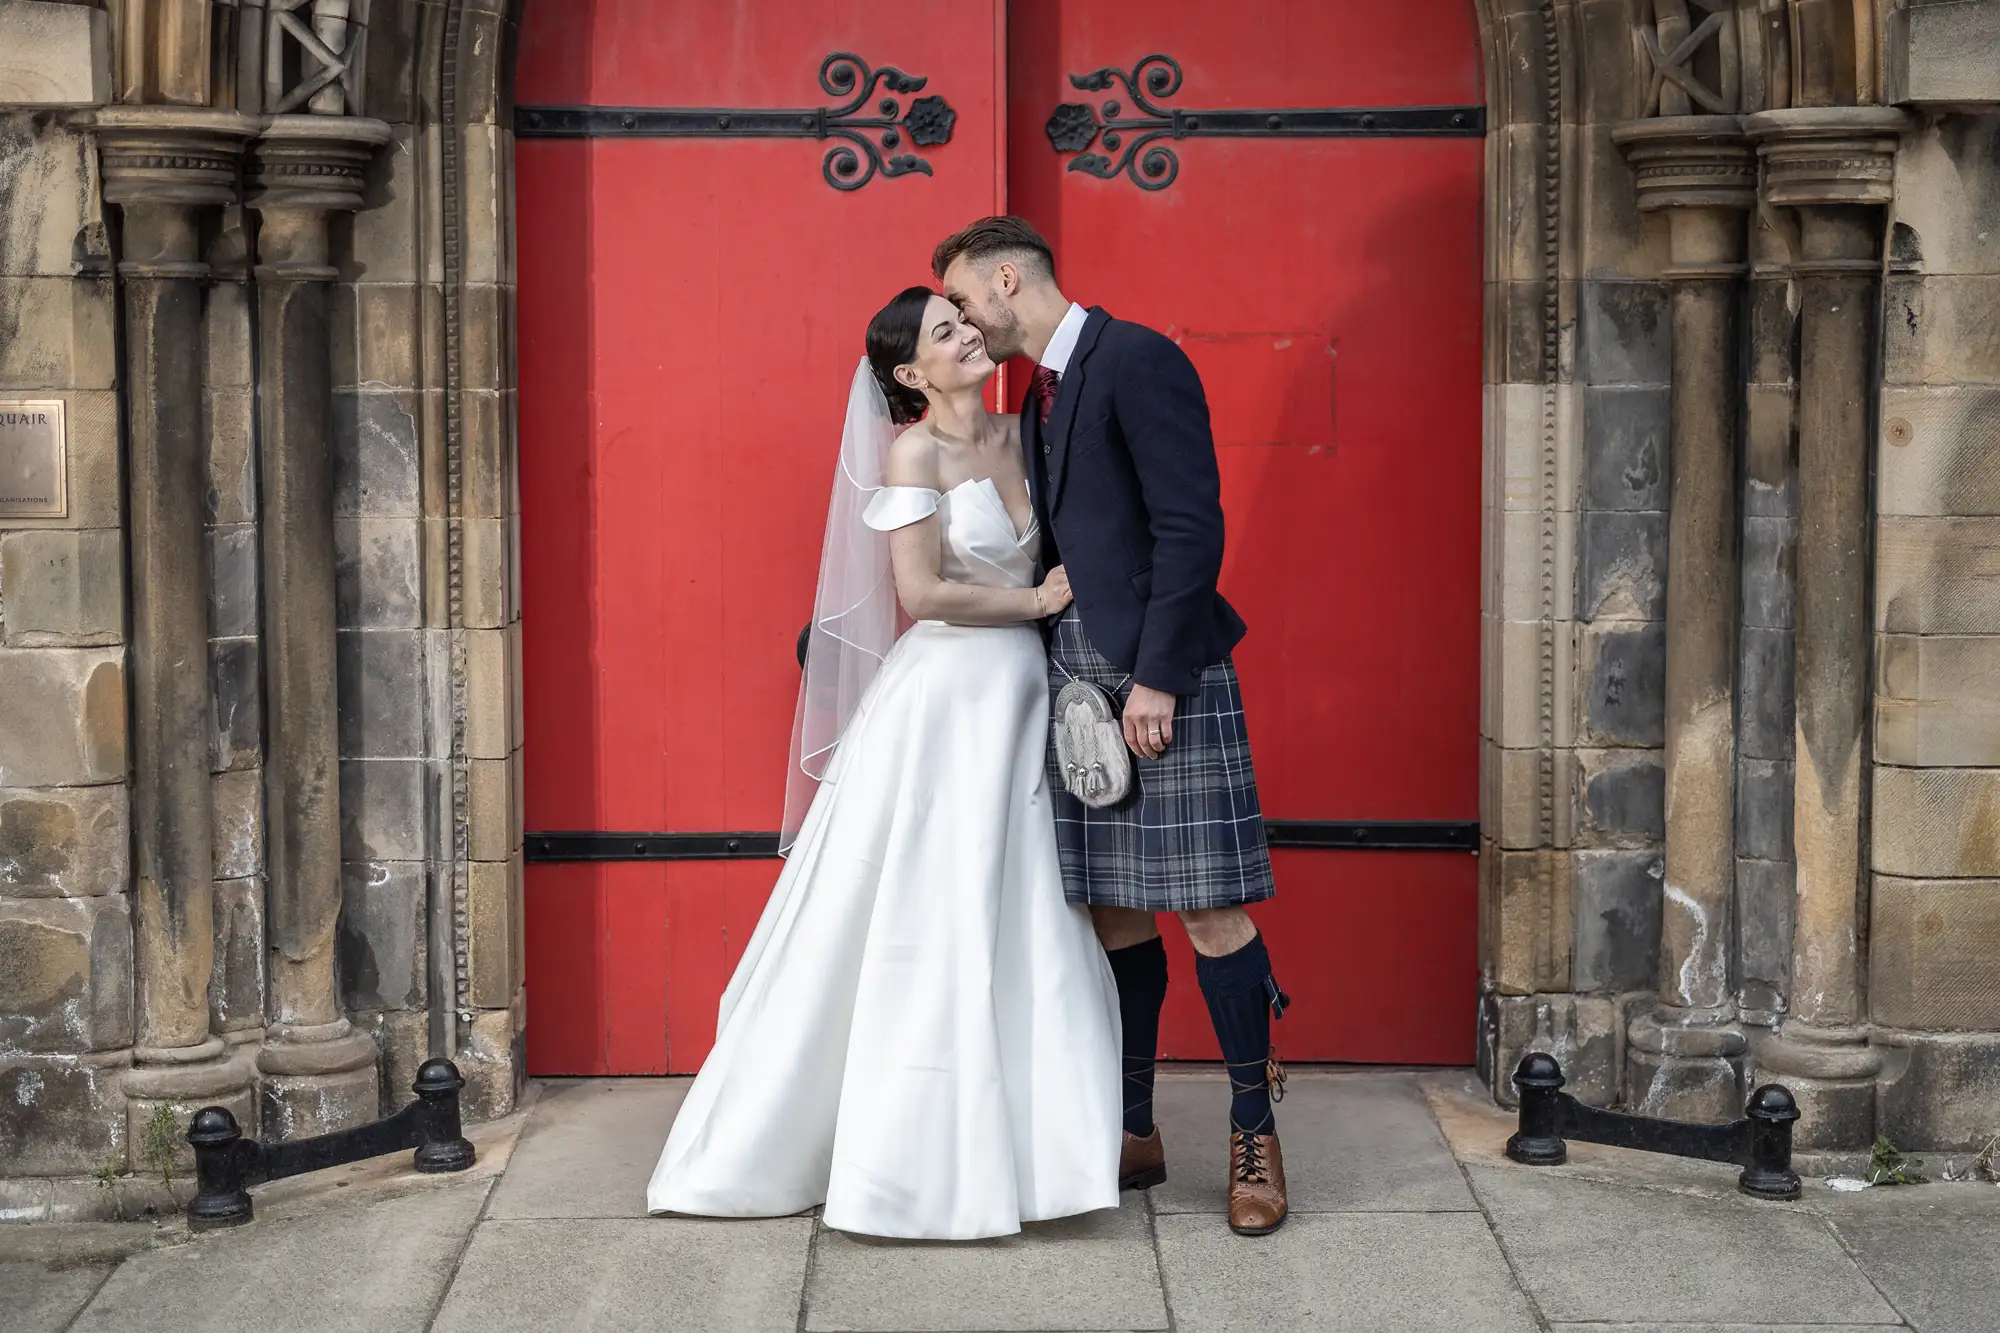 A bride in a white gown and a groom in a kilt share a kiss in front of a historic building with a large red door.